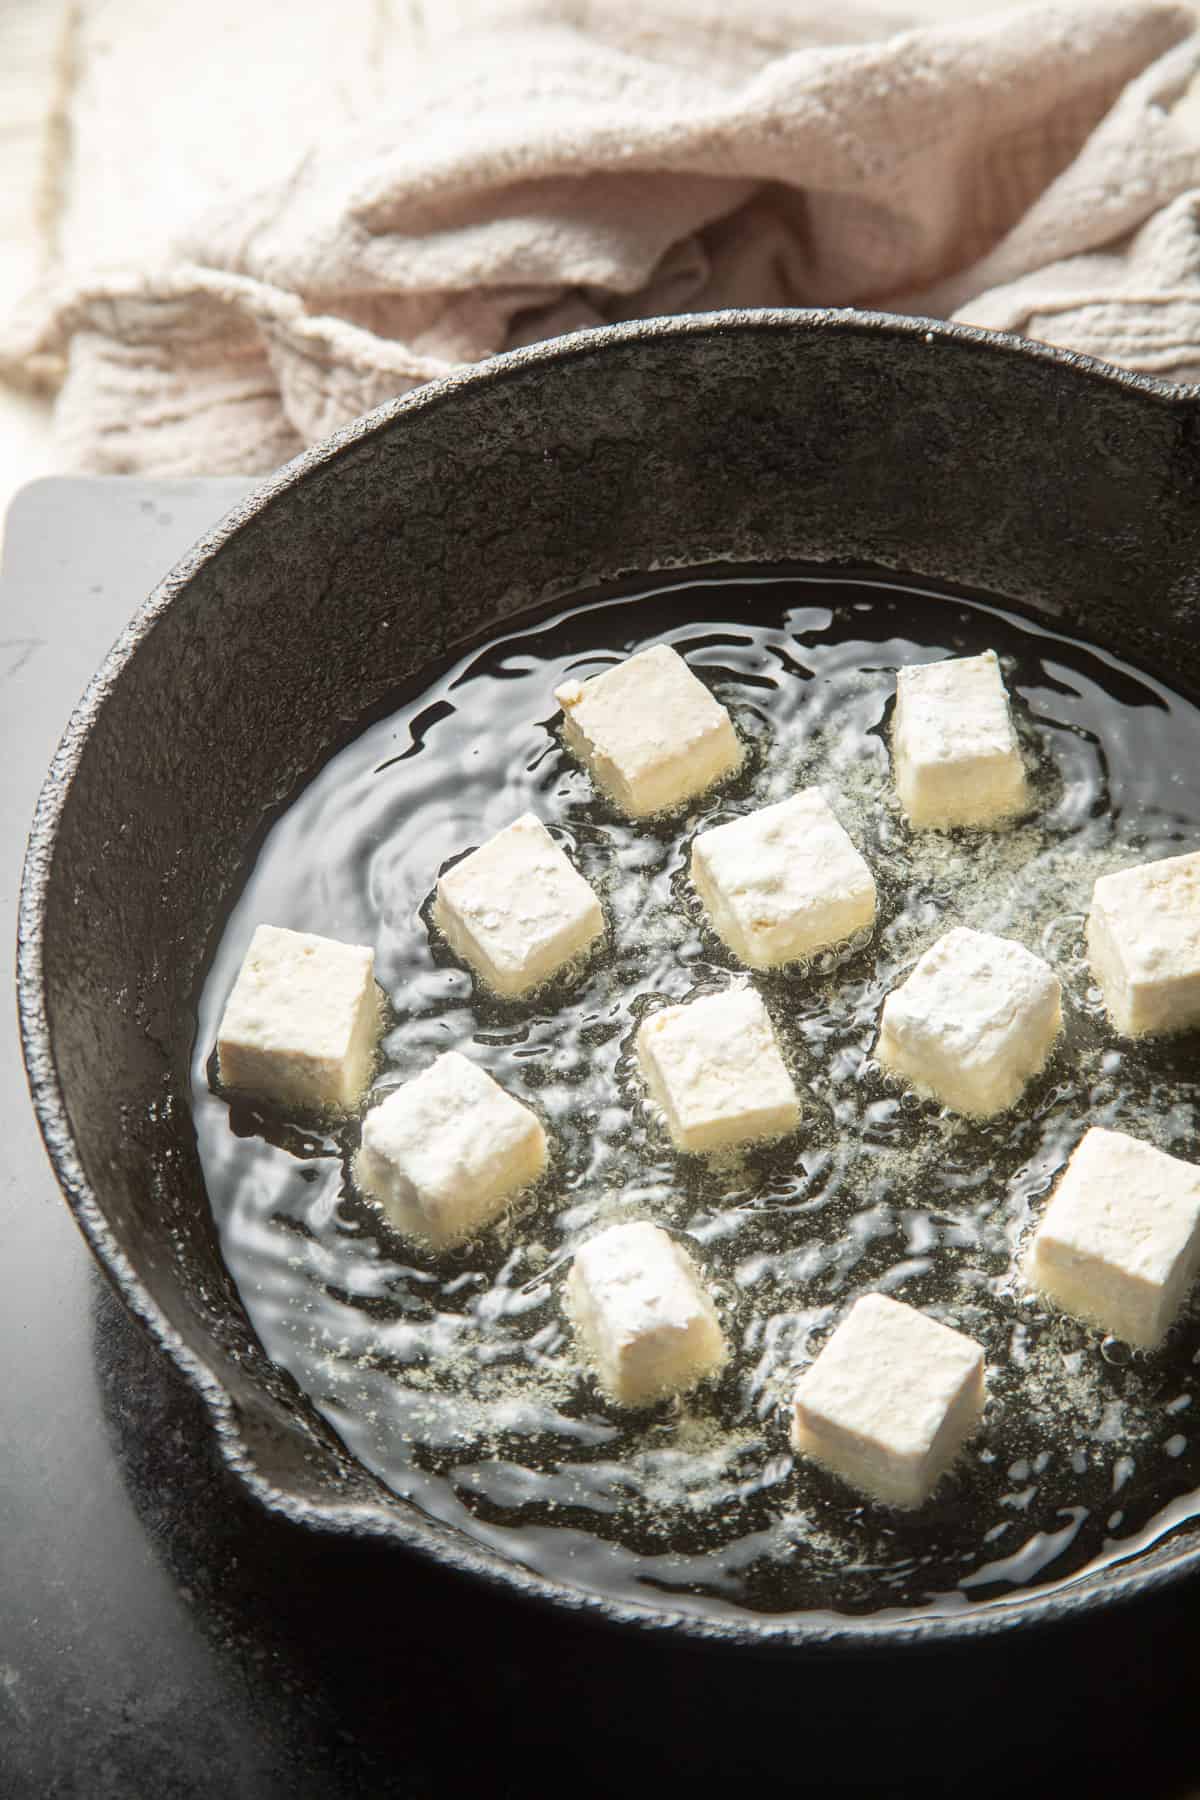 Tofu cubes coated in cornstarch in a skillet filled with oil.